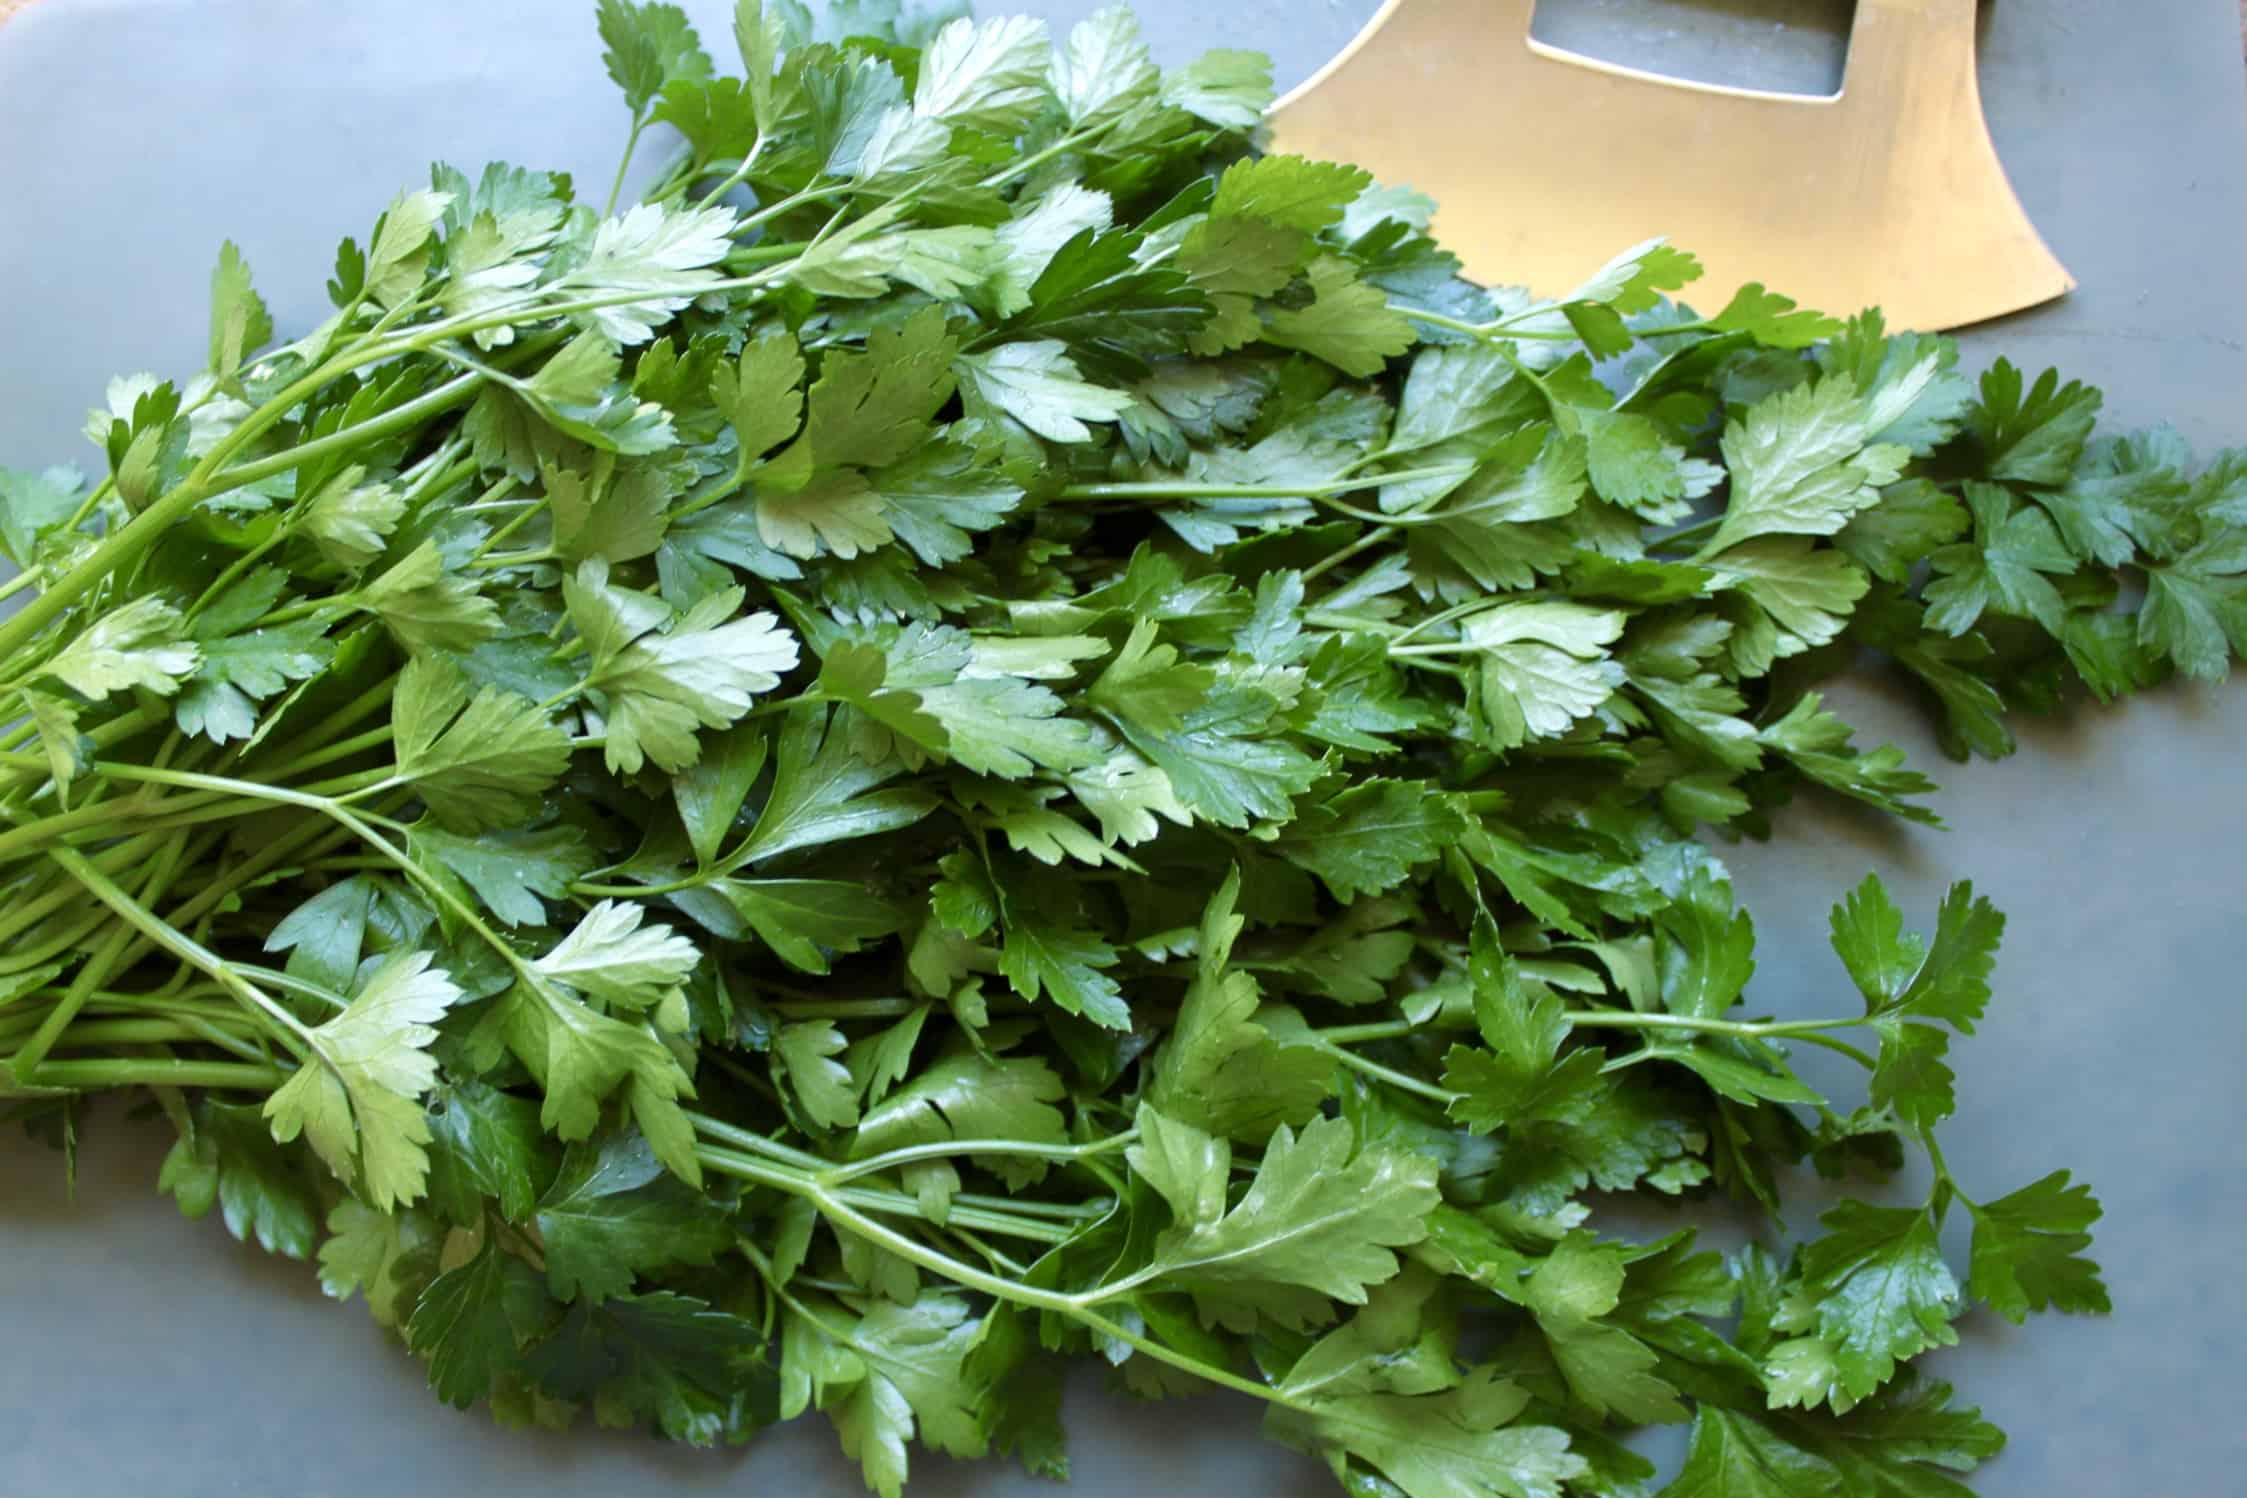 How to freeze fresh parsley